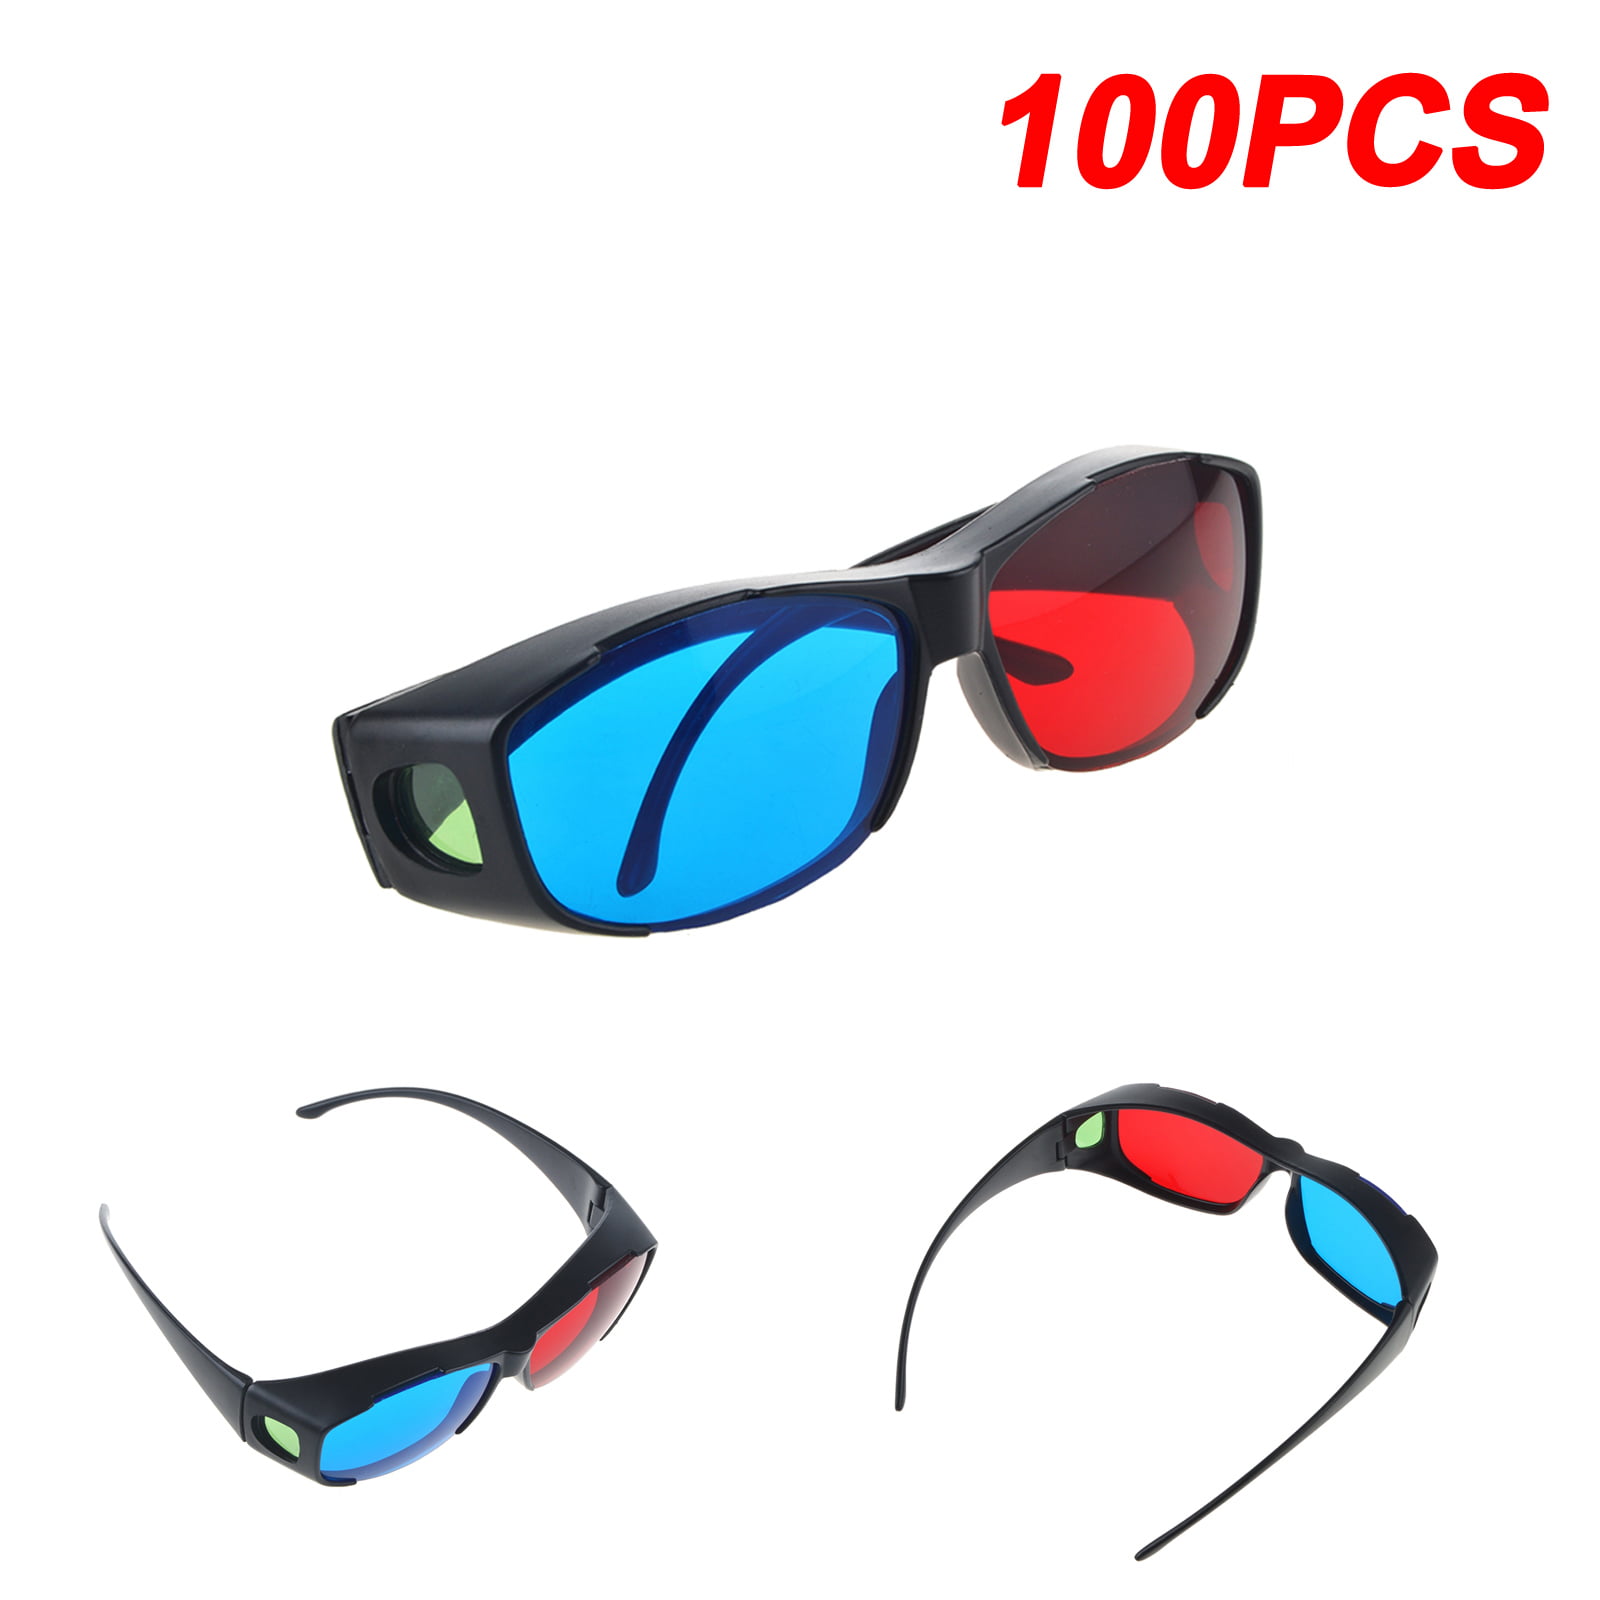 4Pcs Universal 3D Paper Glasses Made from White Card with Red and Cyan Lenses Suitable for Films TV Magazines Comic Books Anaglyph Videos Internet Videos and Pictures and More 